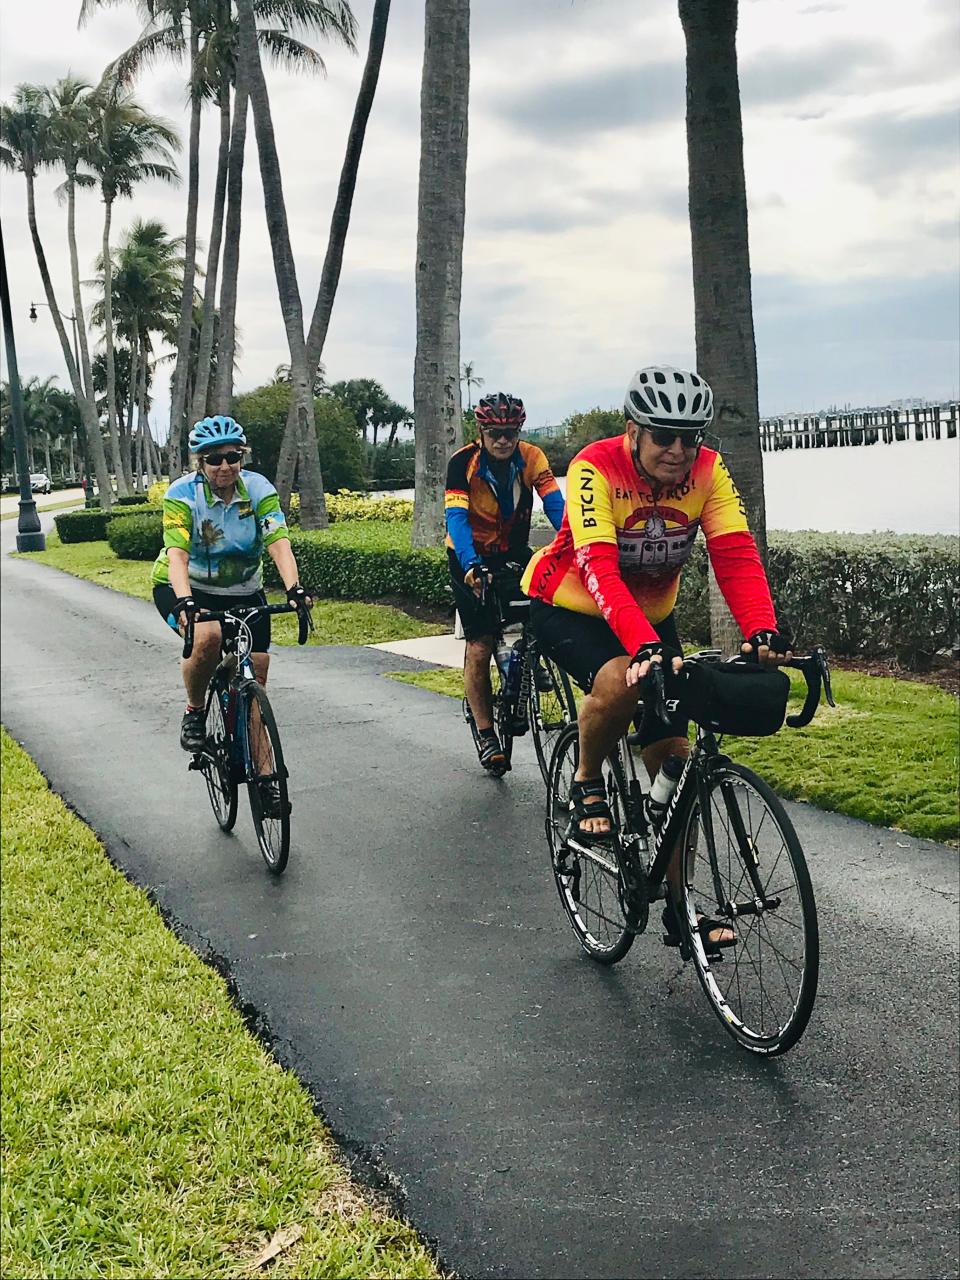 Riders cycling along the route in South Palm Beach.